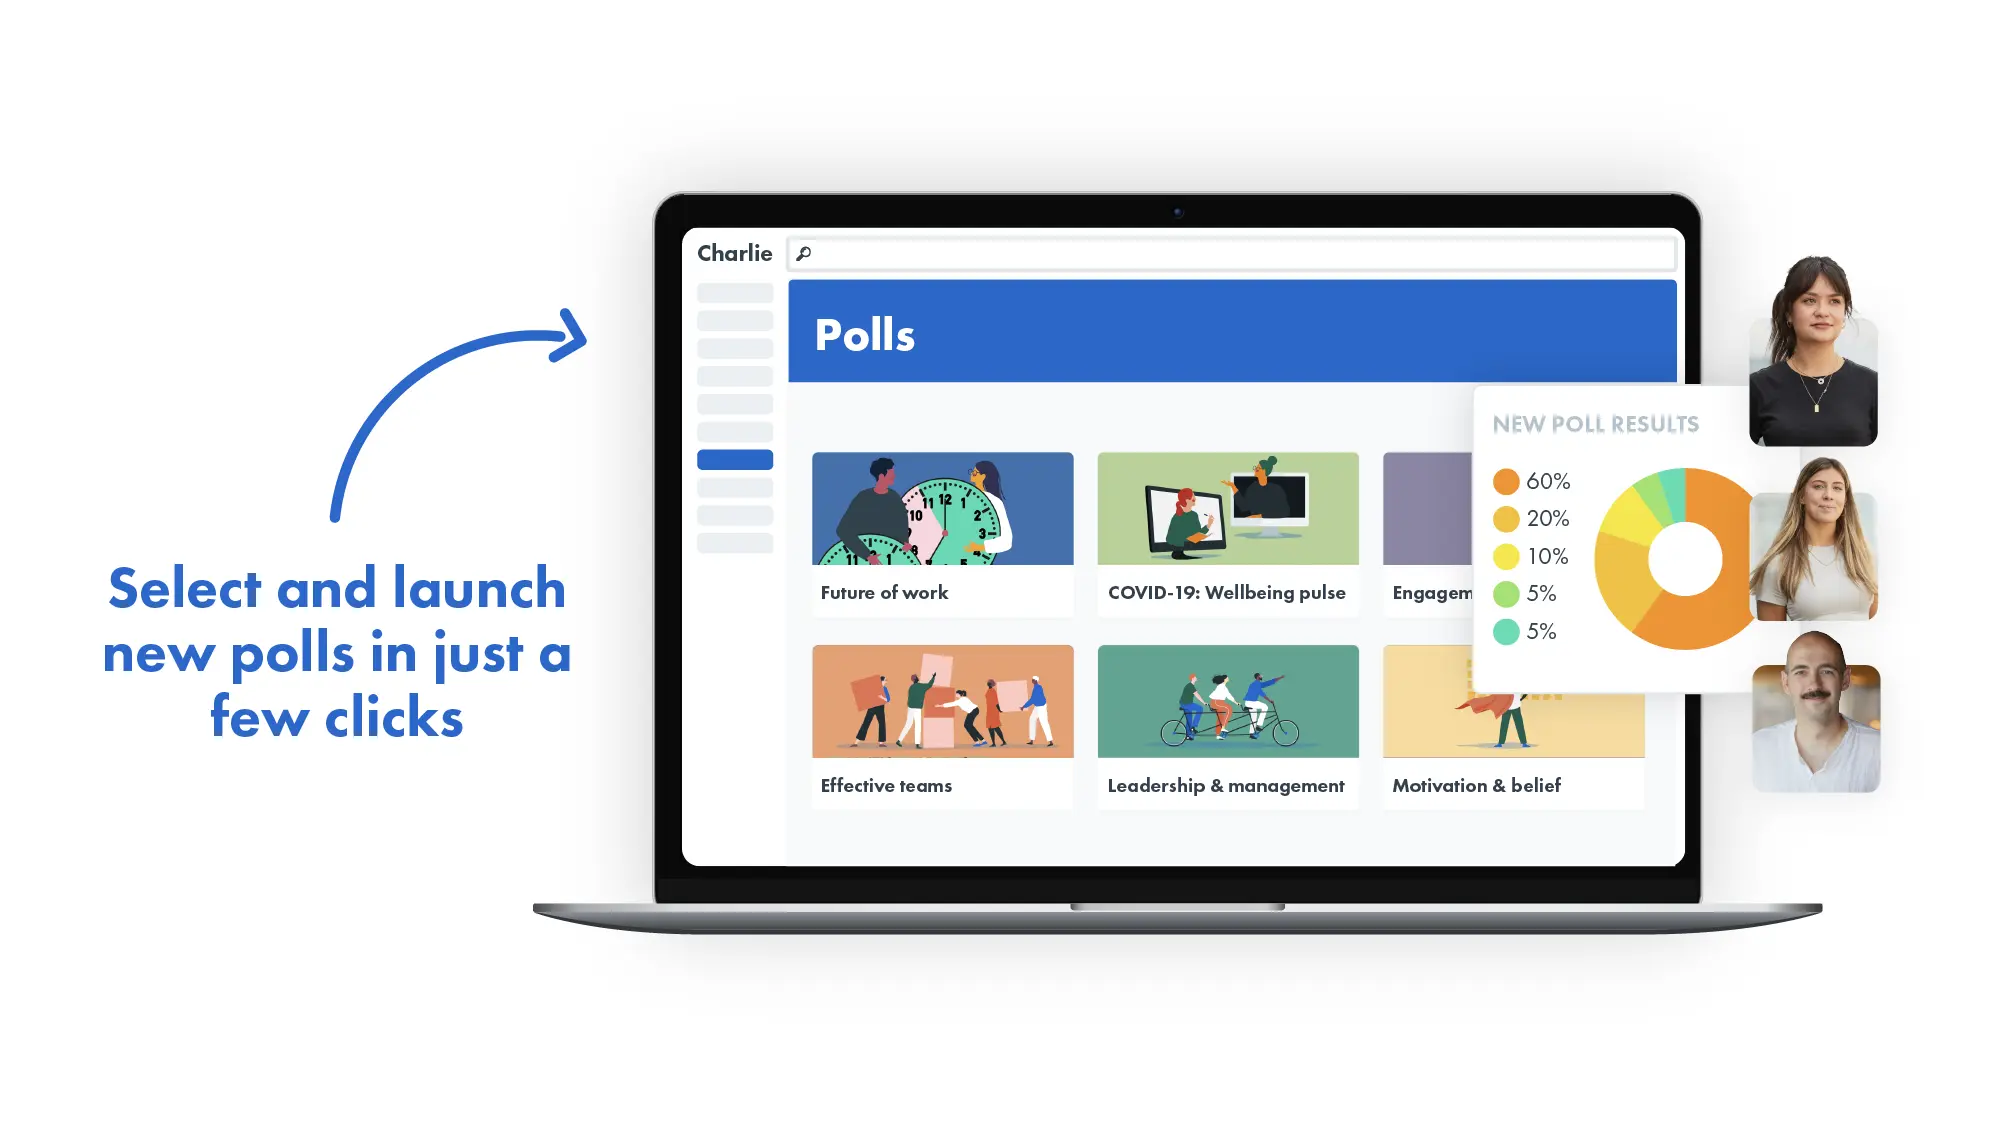 Select and launch new polls in just a few clicks with Charlie